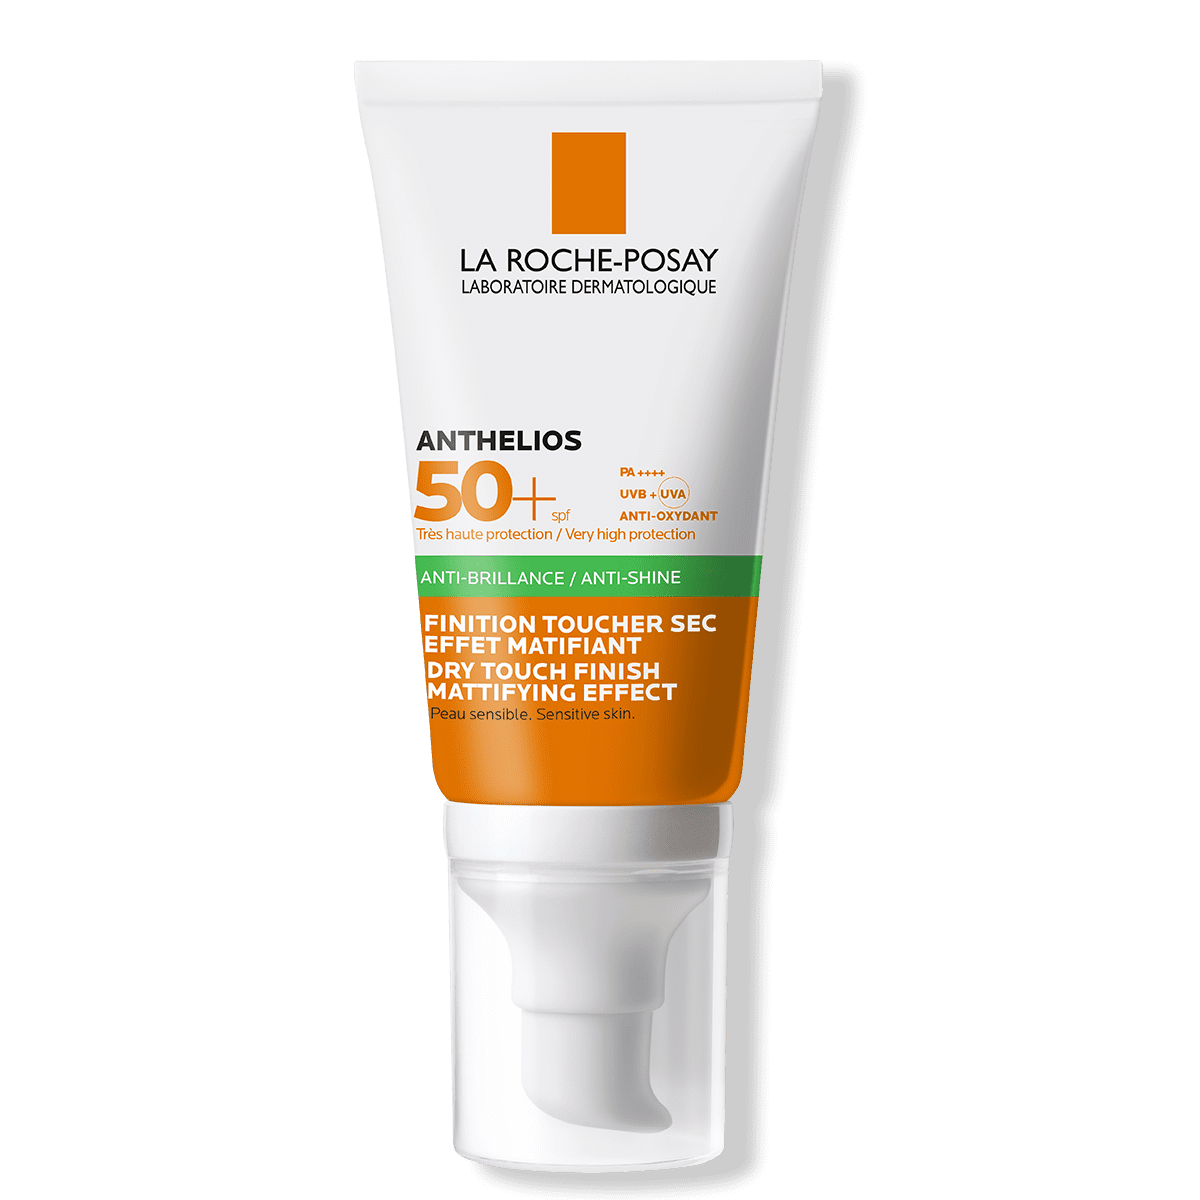 La Roche Posay ProductPage Sun Anthelios XL Dry Touch Gel Cream Spf50 